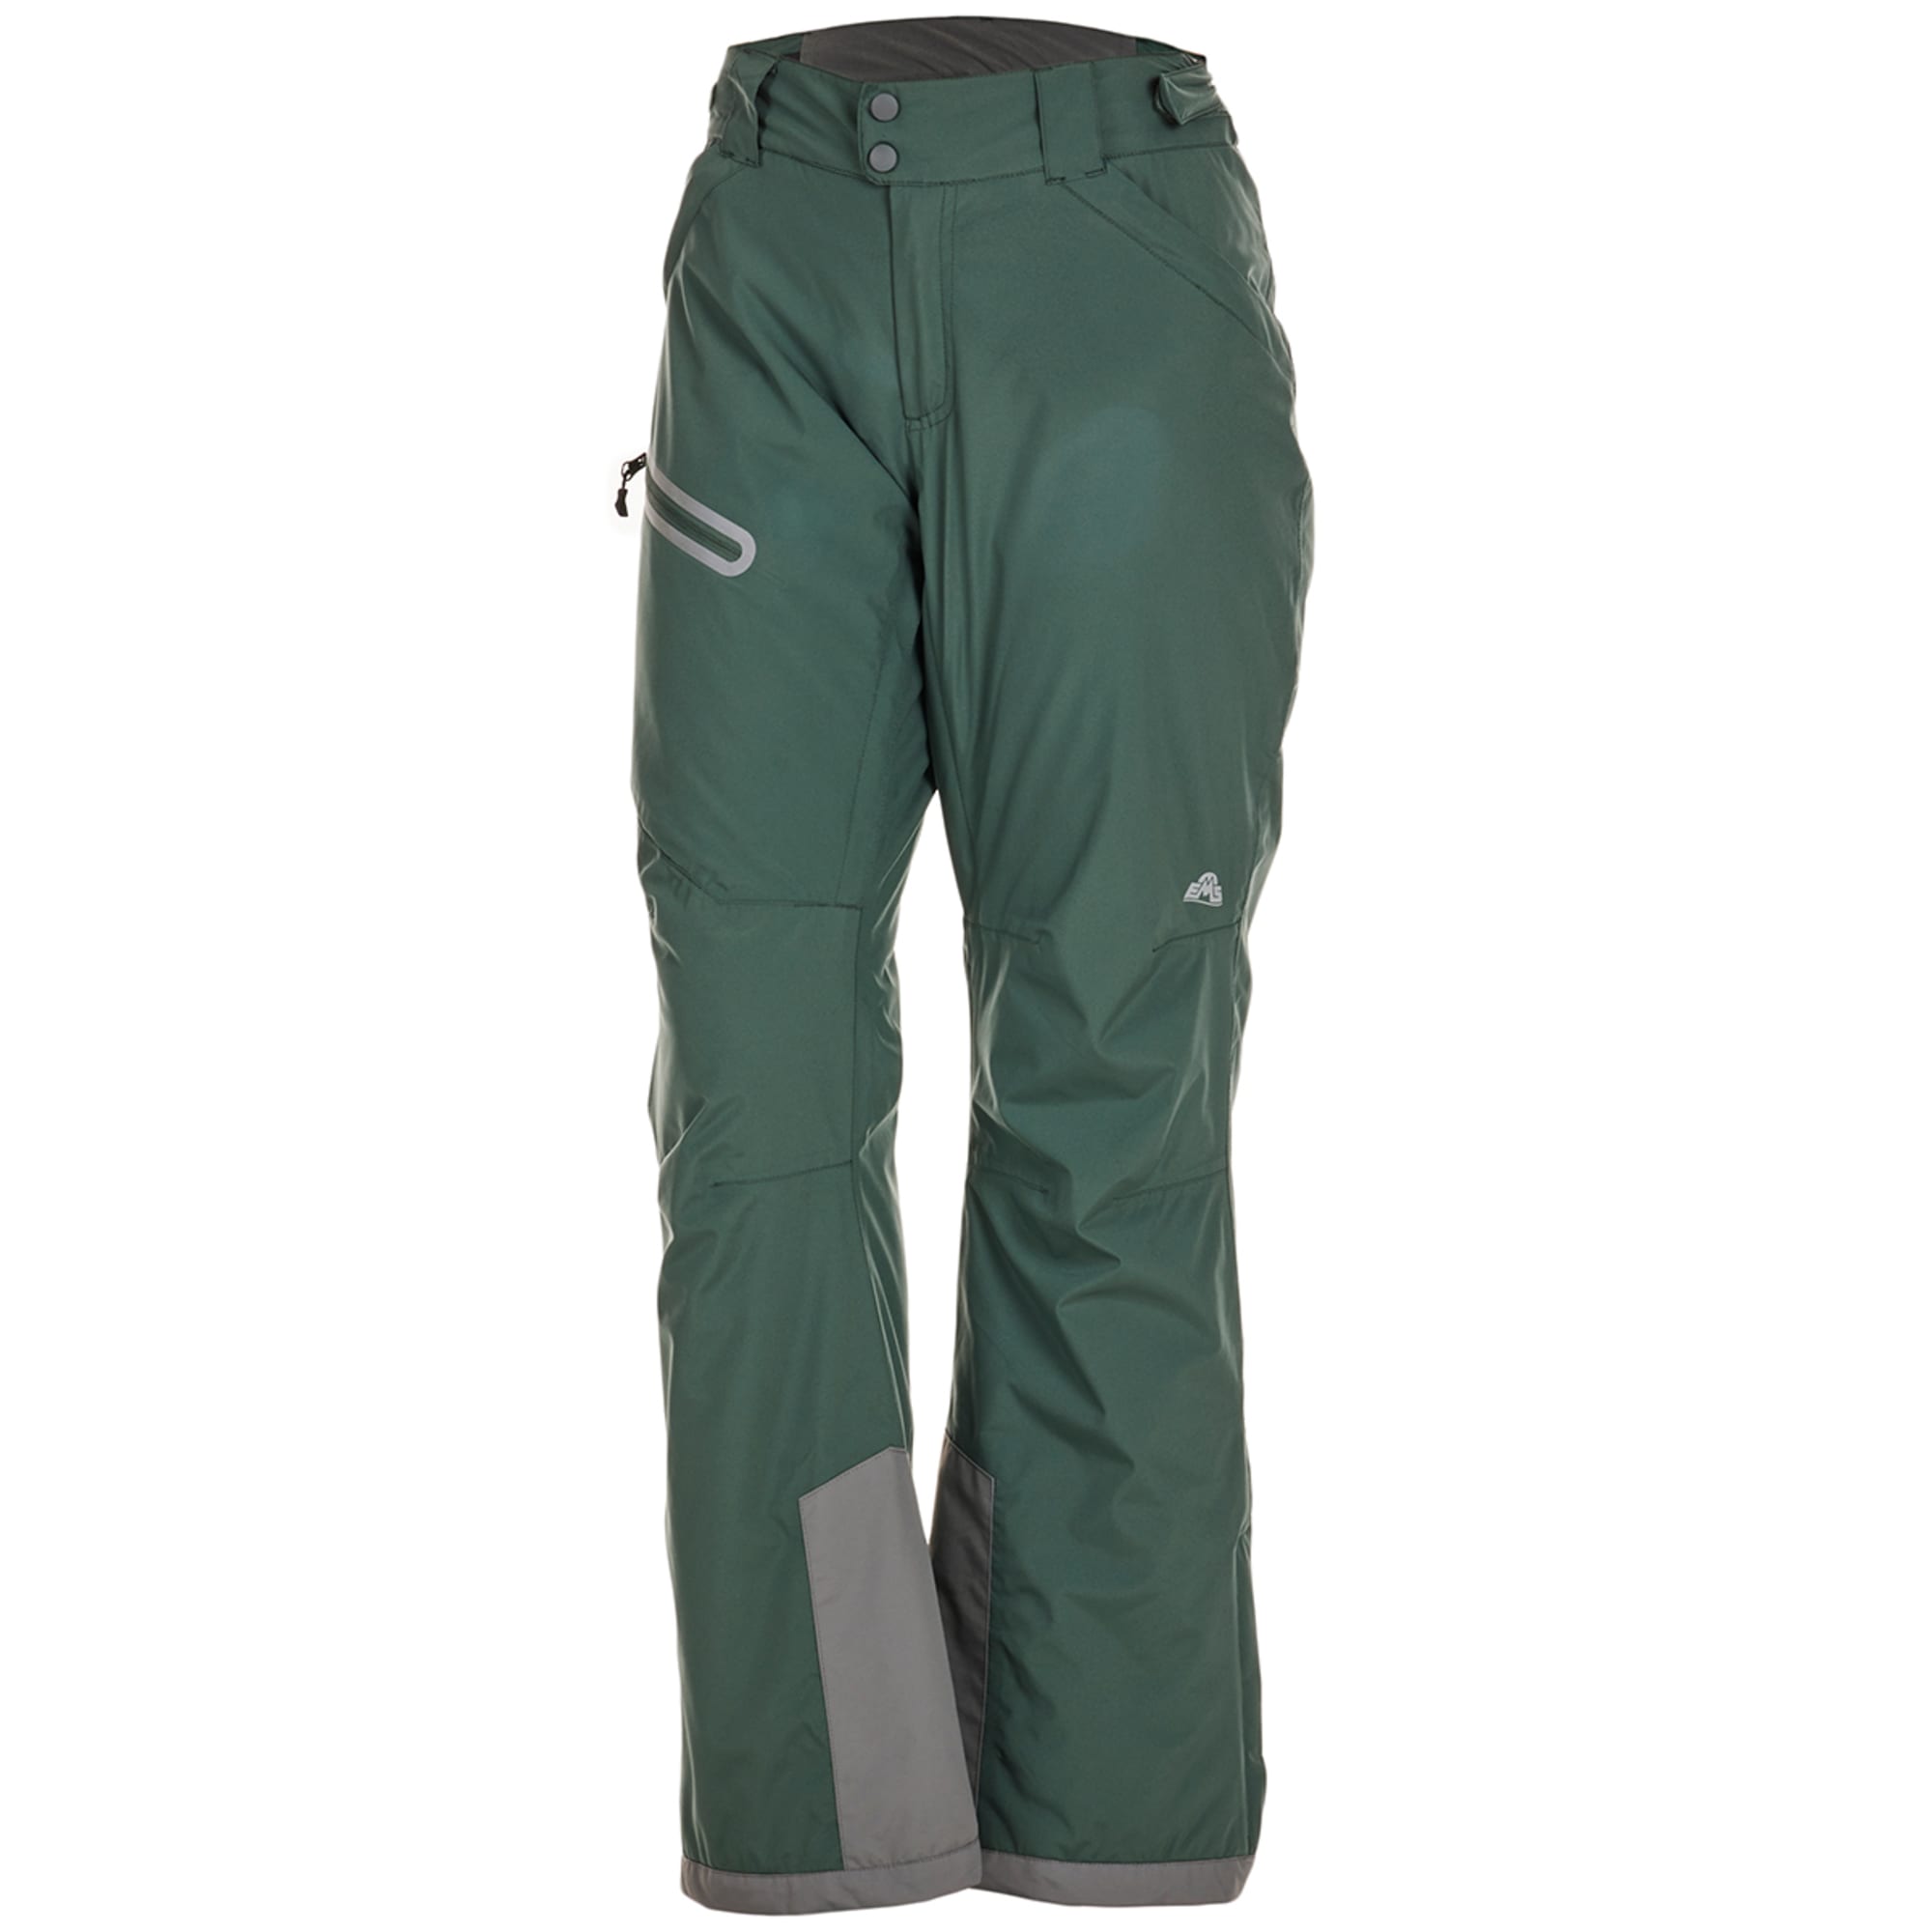 EMS Women's Expedition Insulated Pants - Bob's Stores